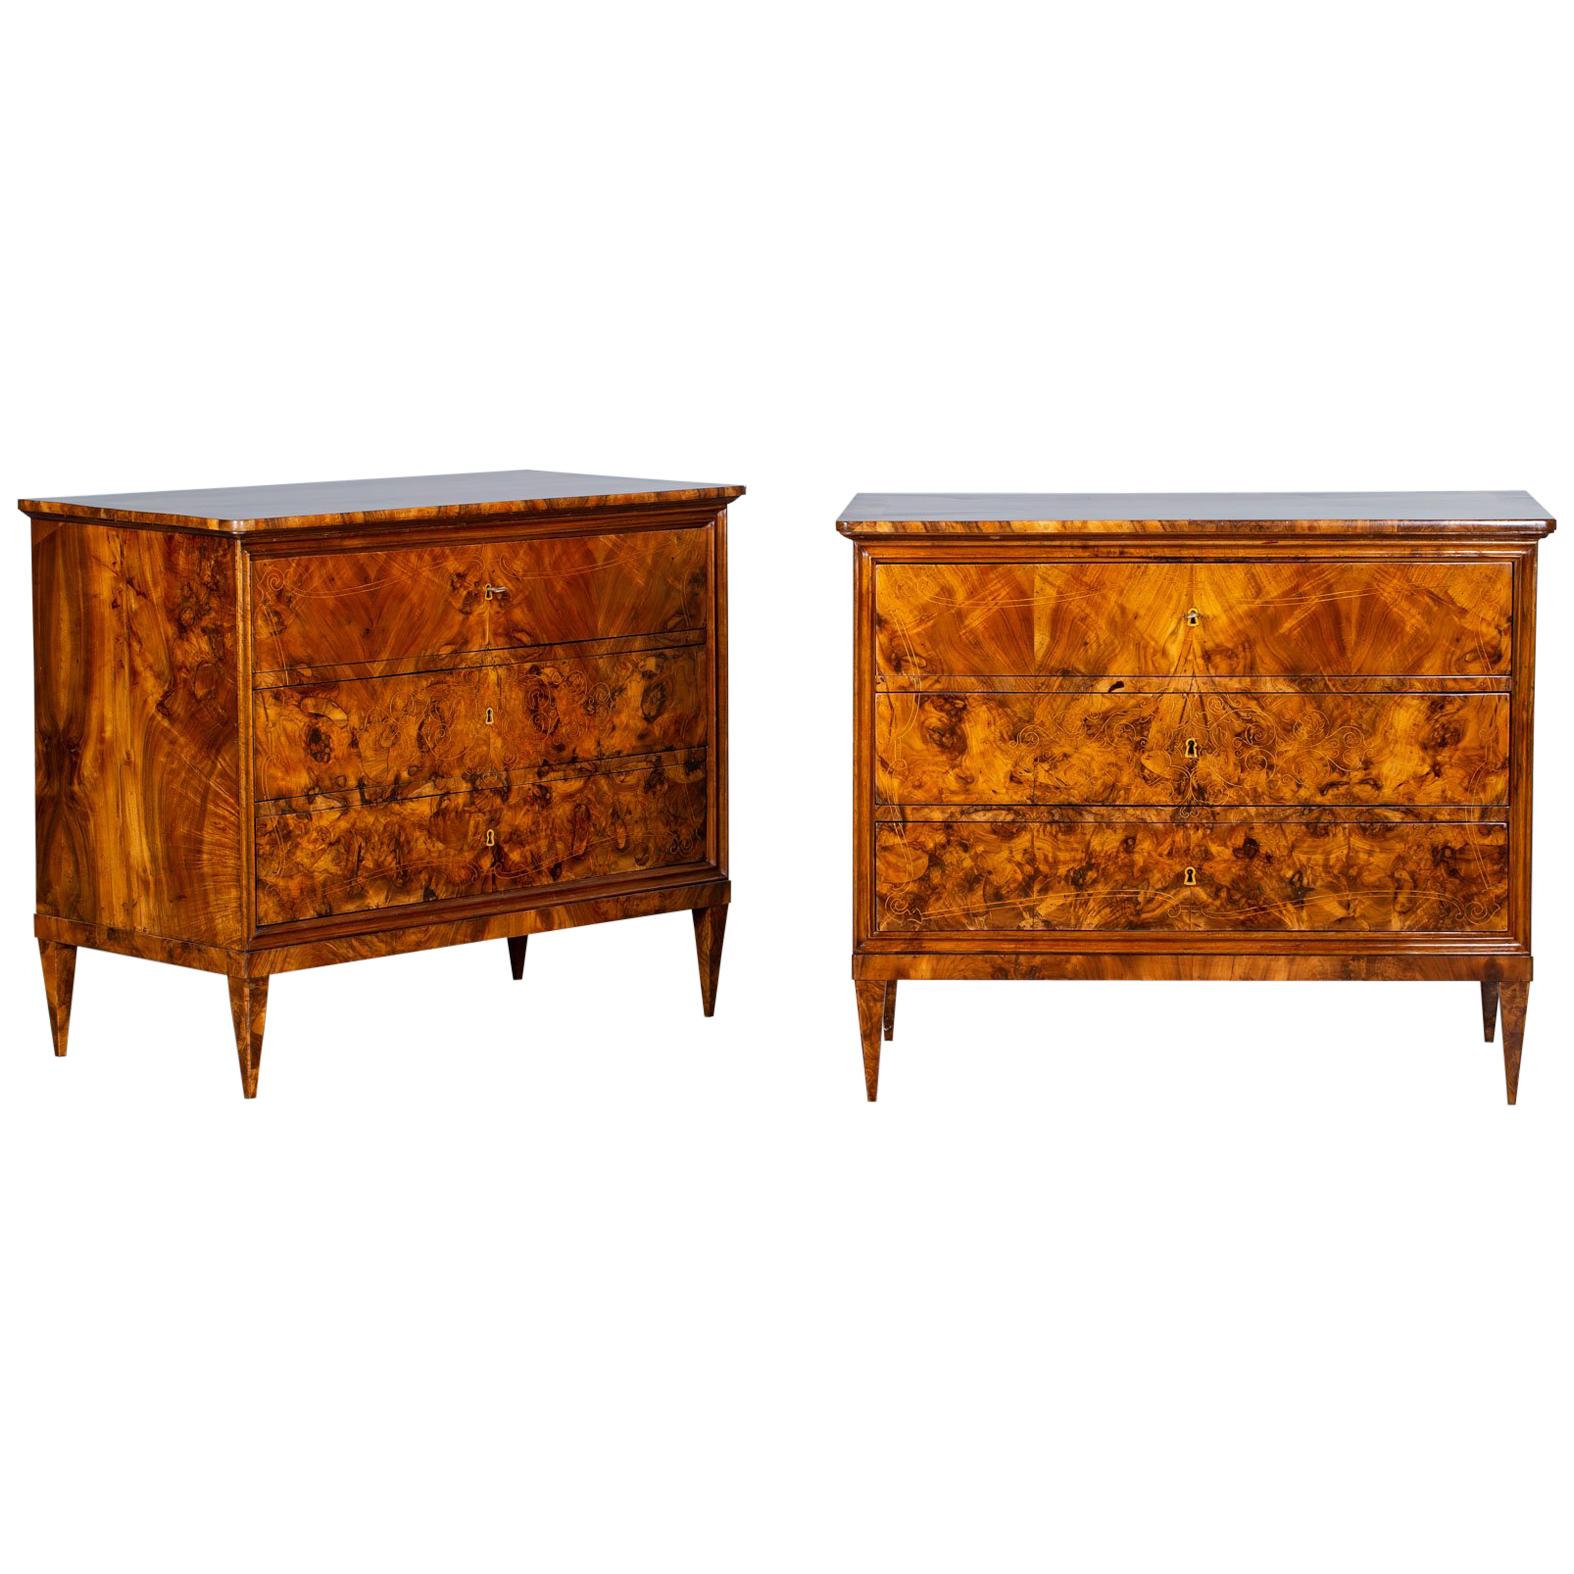 Antique Neoclassical Burl Walnut and Maple Inlay Chest of Drawers, Pair